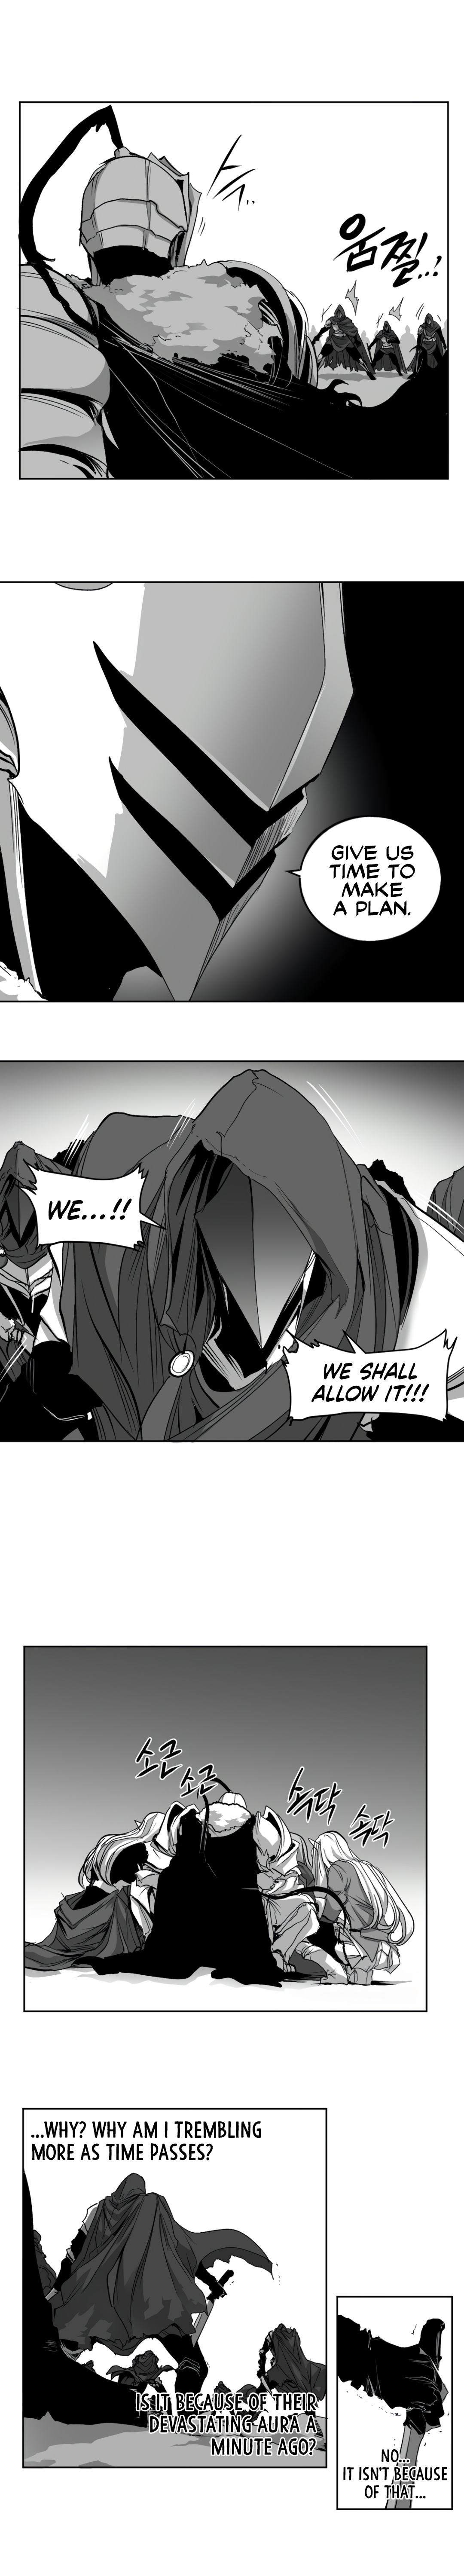 What Happens Inside The Dungeon Vol.2 Chapter 138: Side Story - Chapter 28 - Picture 3